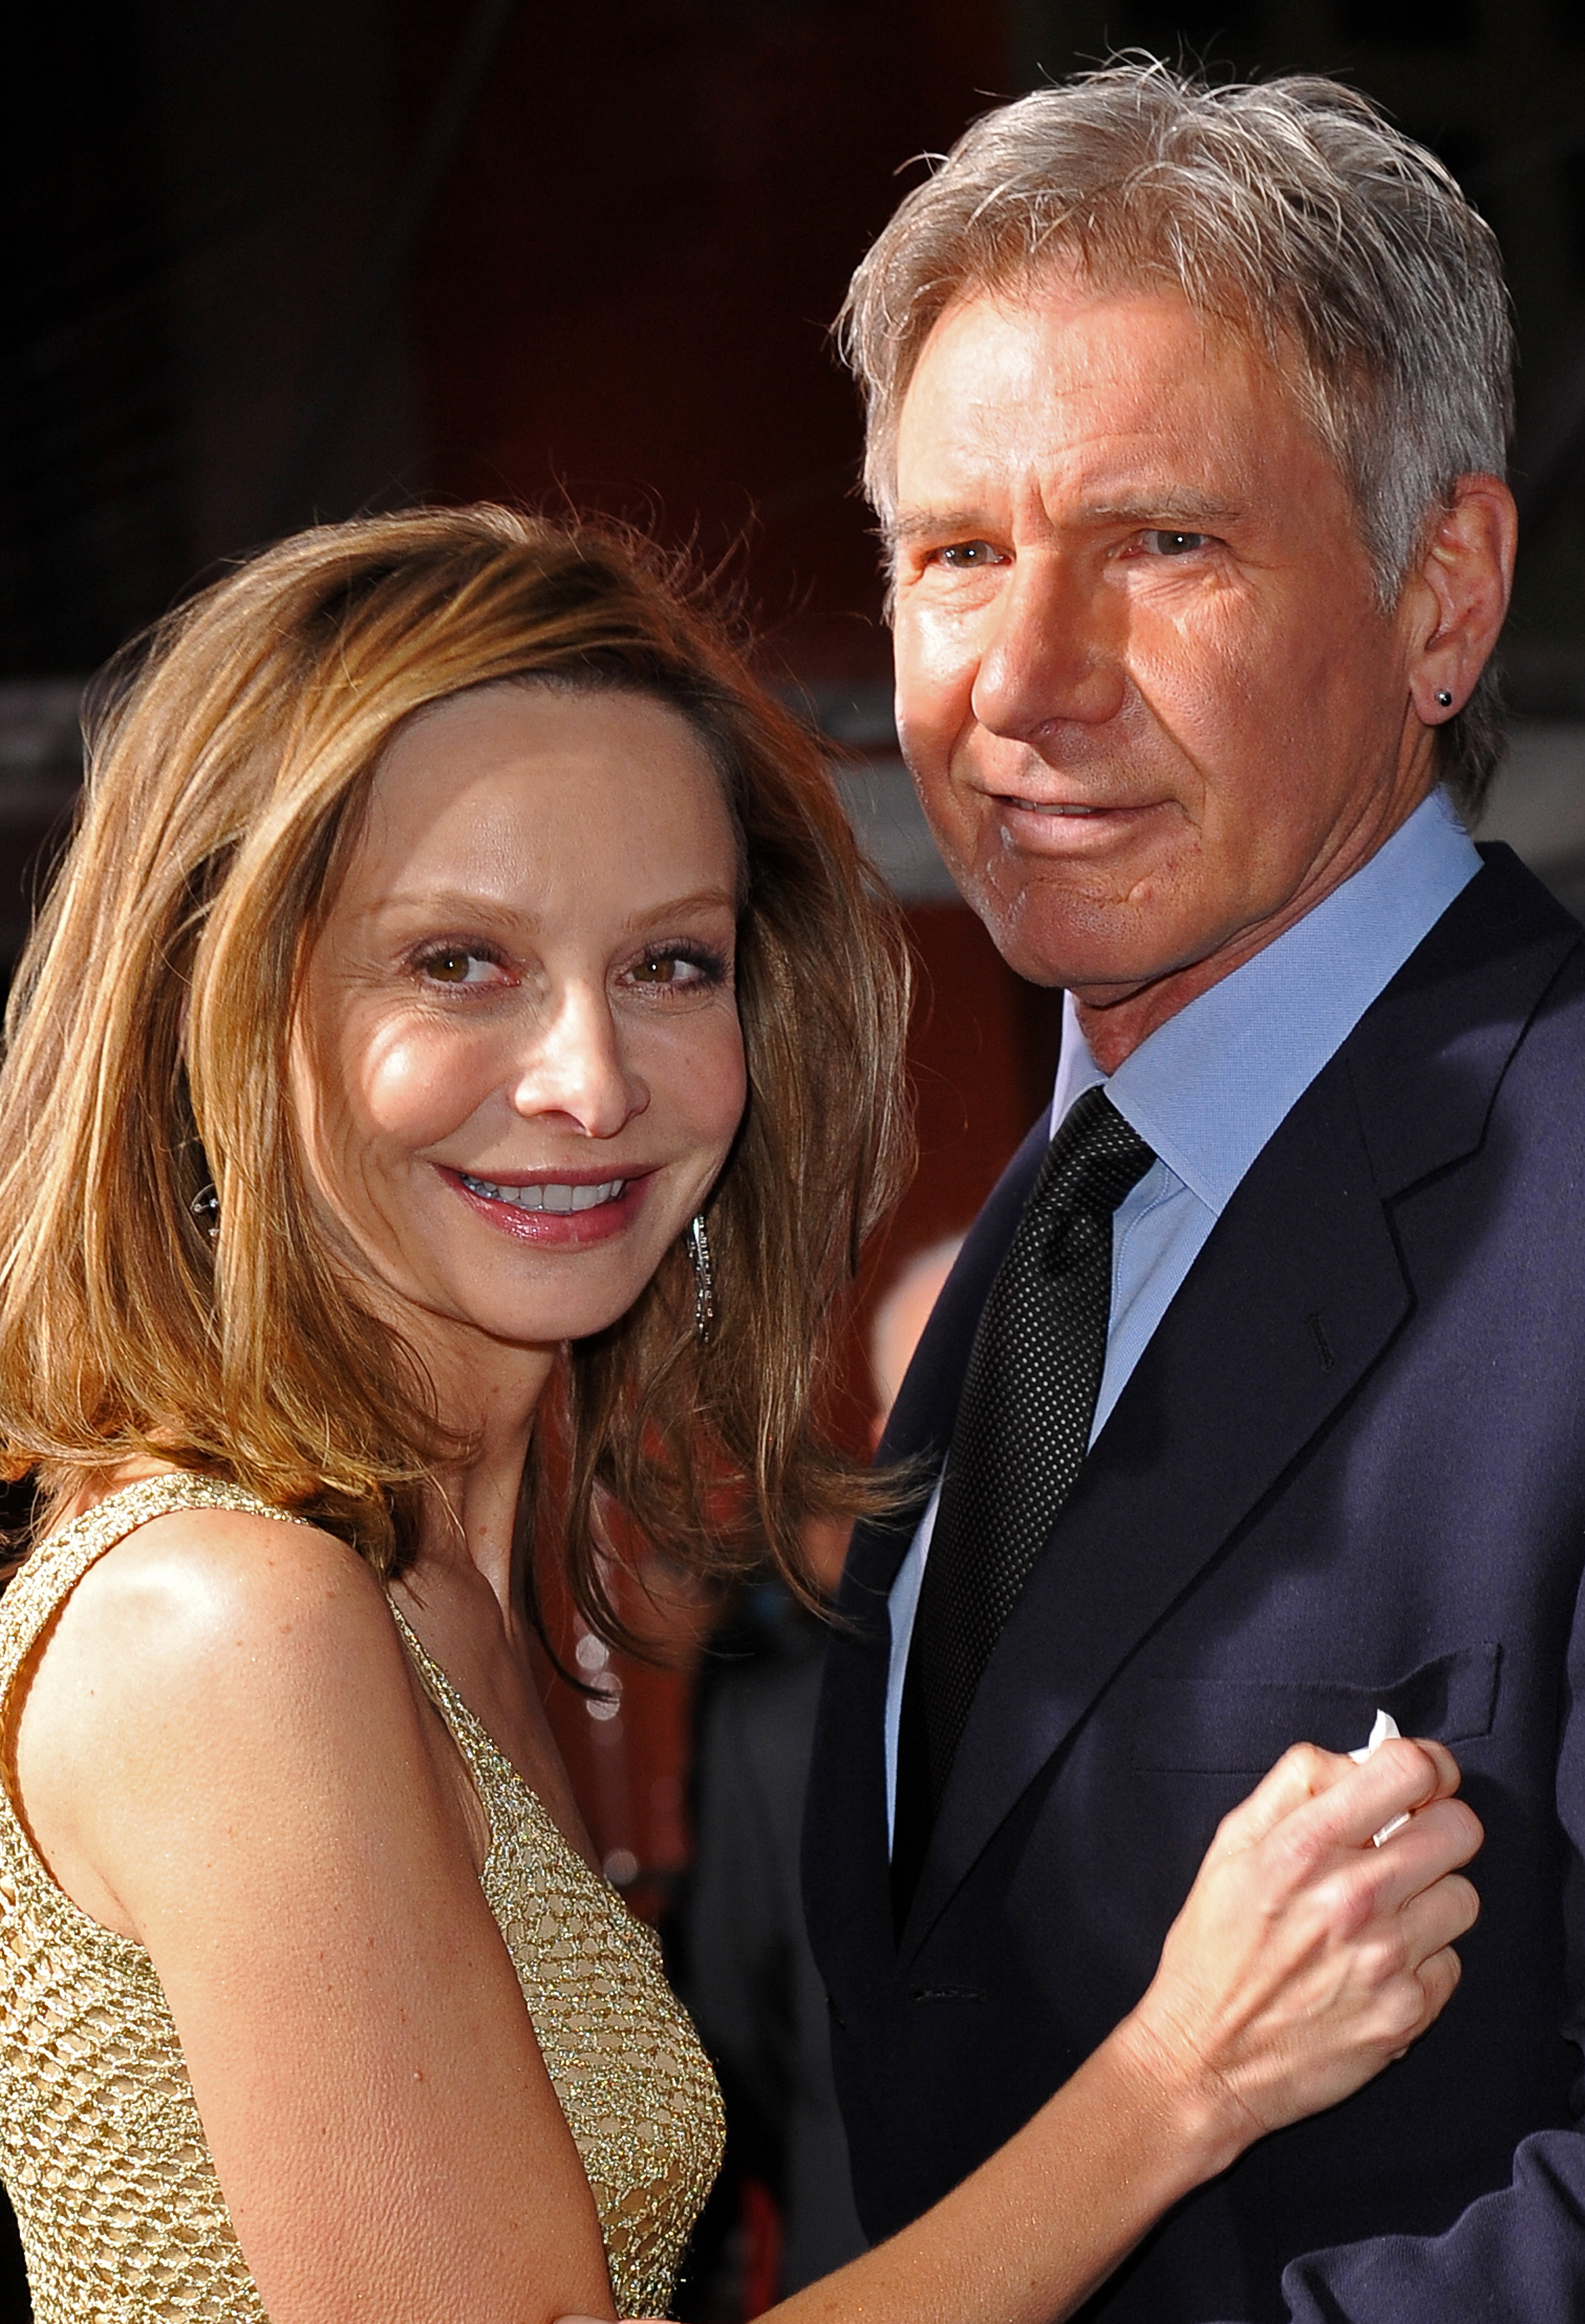 Harrison Ford and Calista Flockhart at the premiere of CBS Films' "Extraordinary Measures" on January 19, 2010 in Hollywood, California | Source: Getty Images